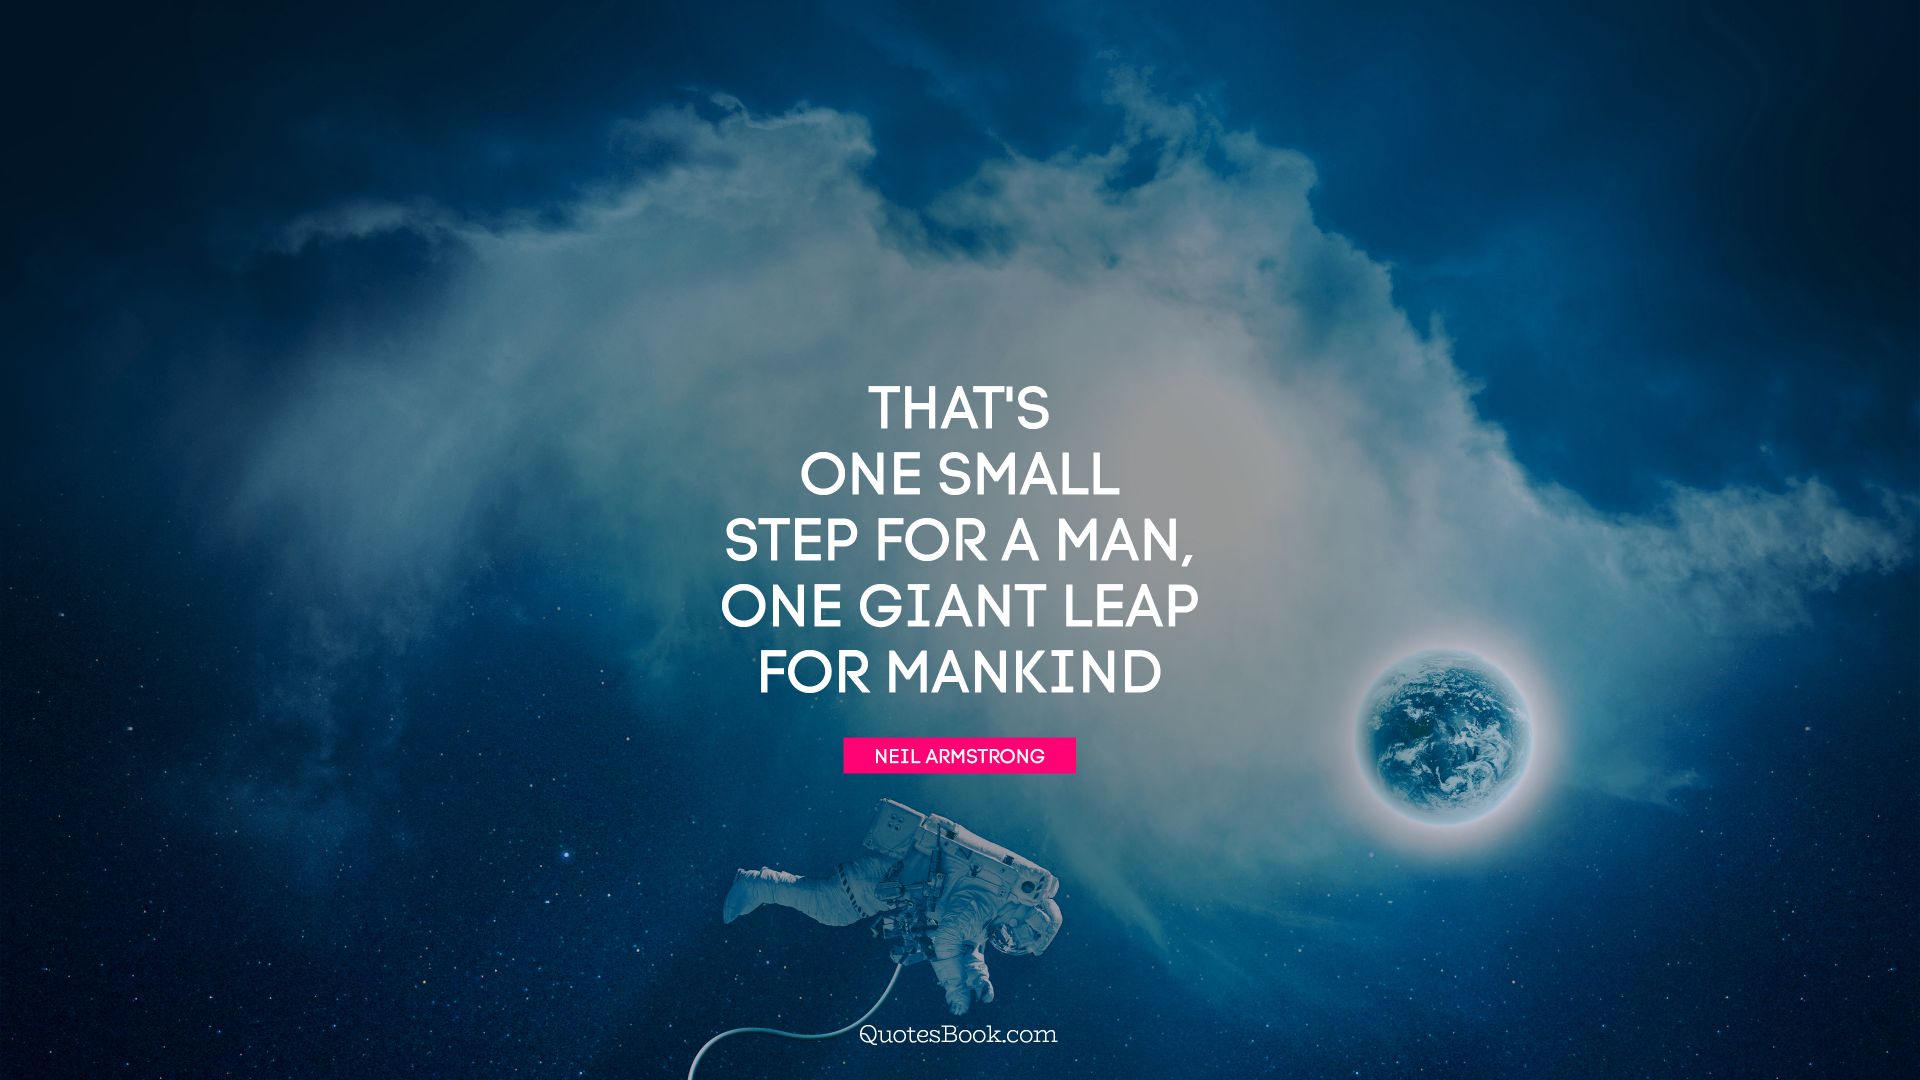 That's one small step for a man, one giant leap for mankind. - Quote by Neil Armstrong